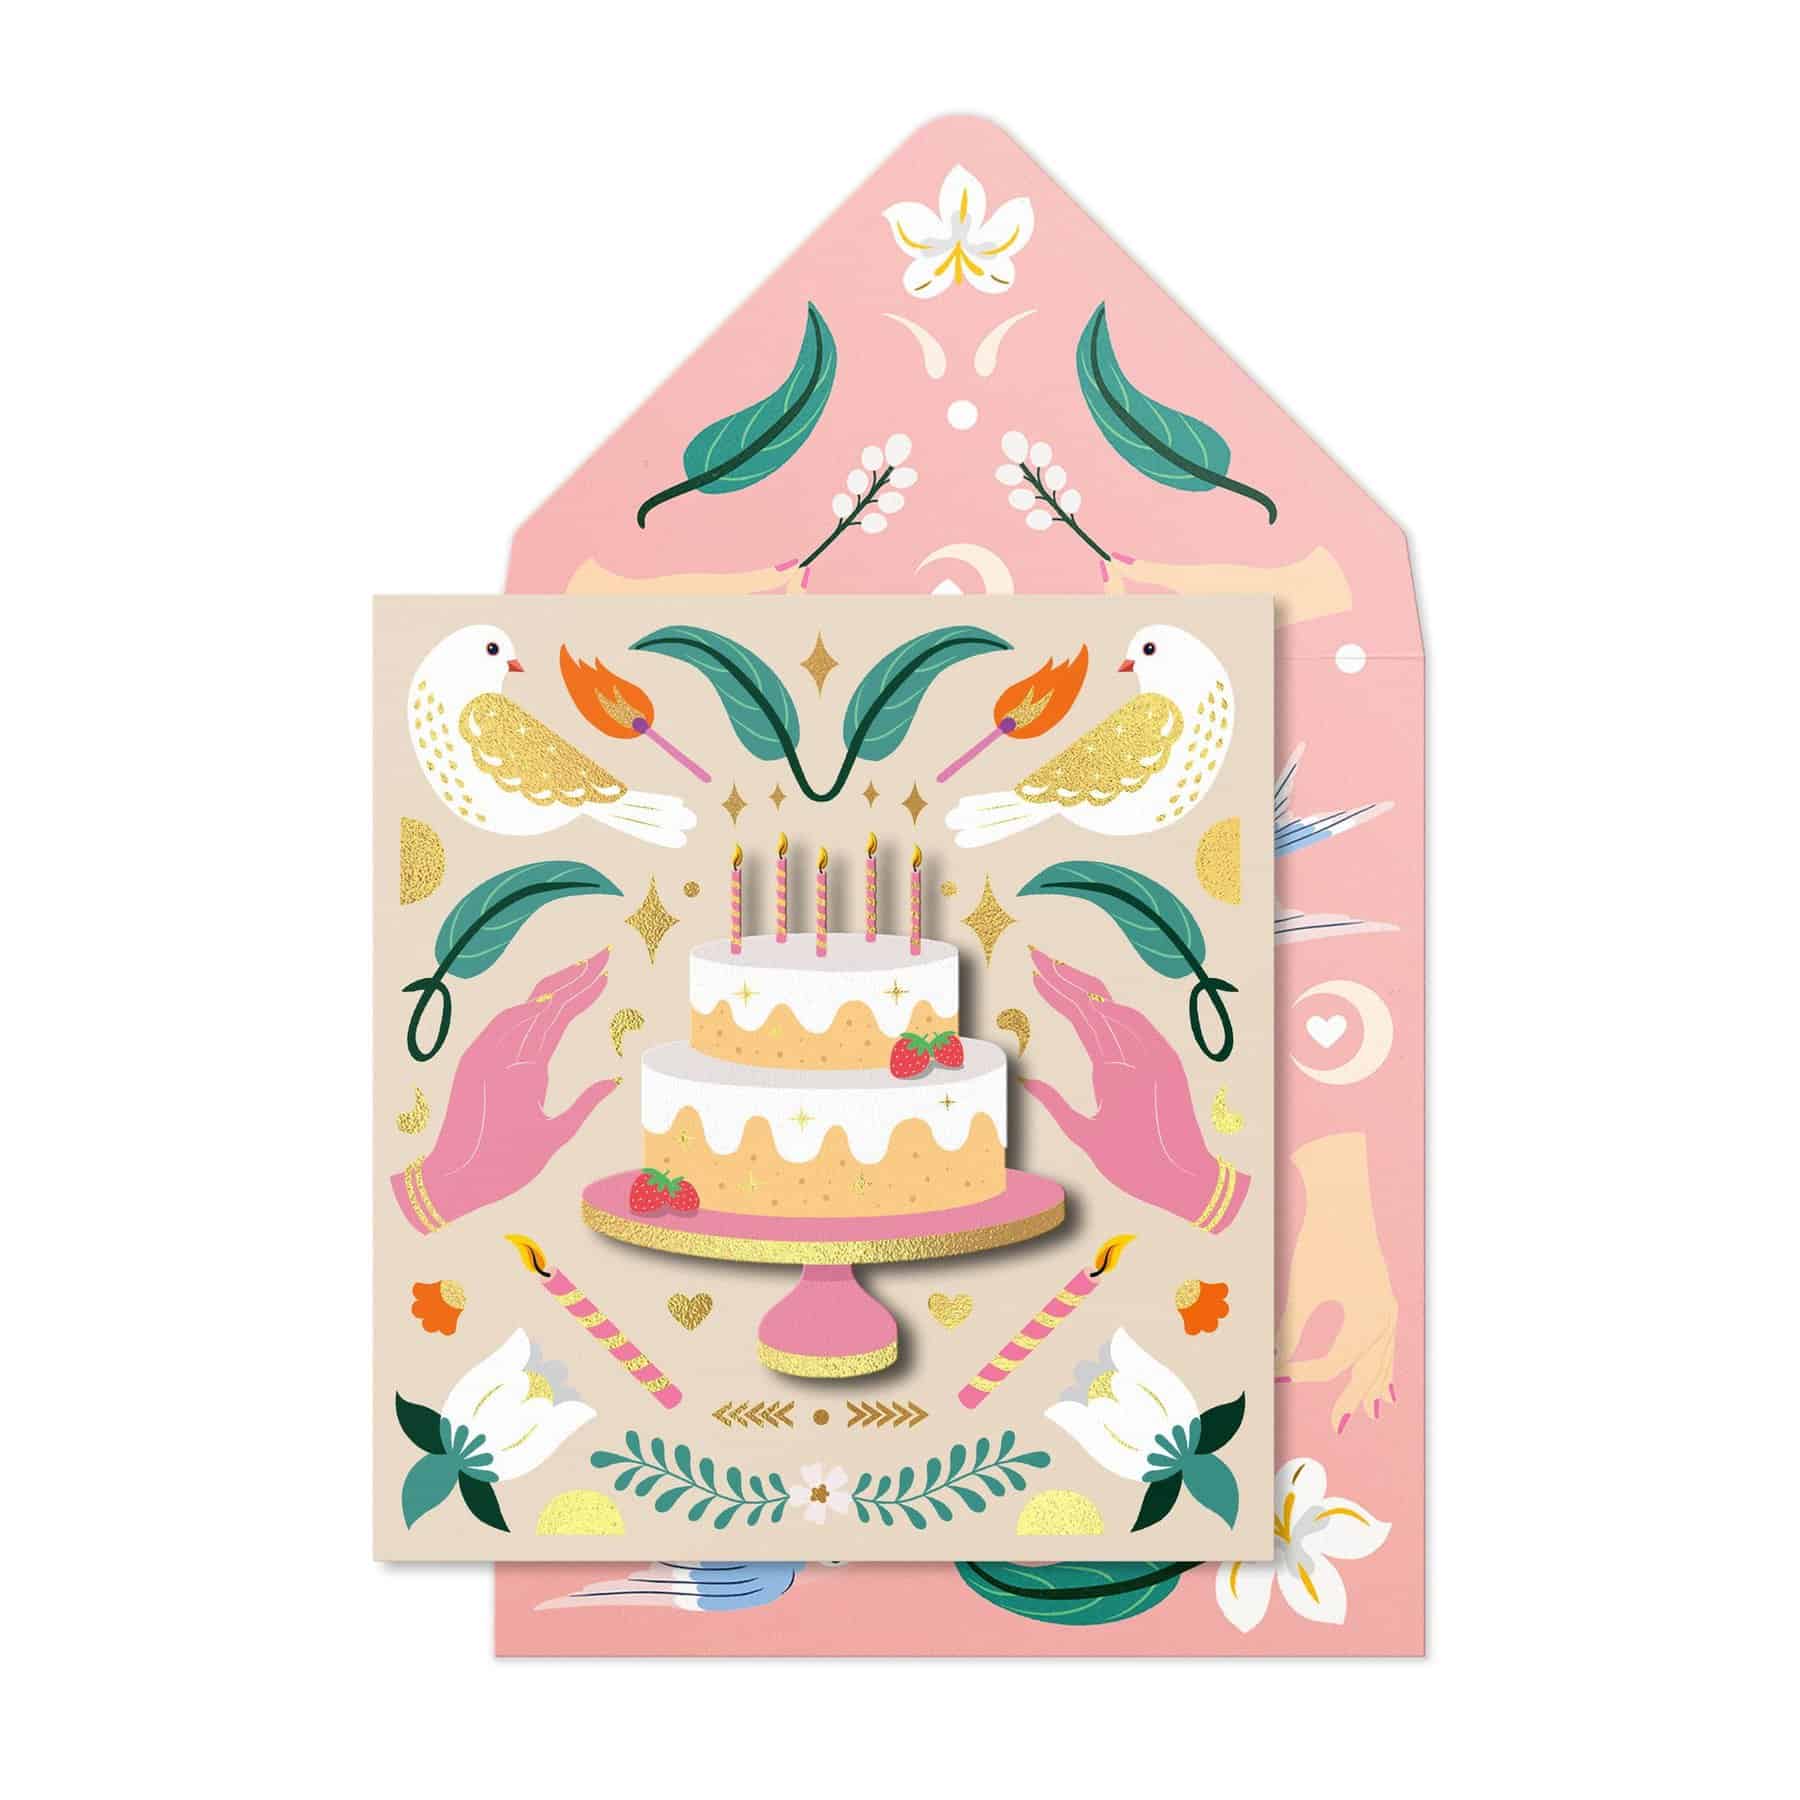 Big Cake With Candles Birthday Card